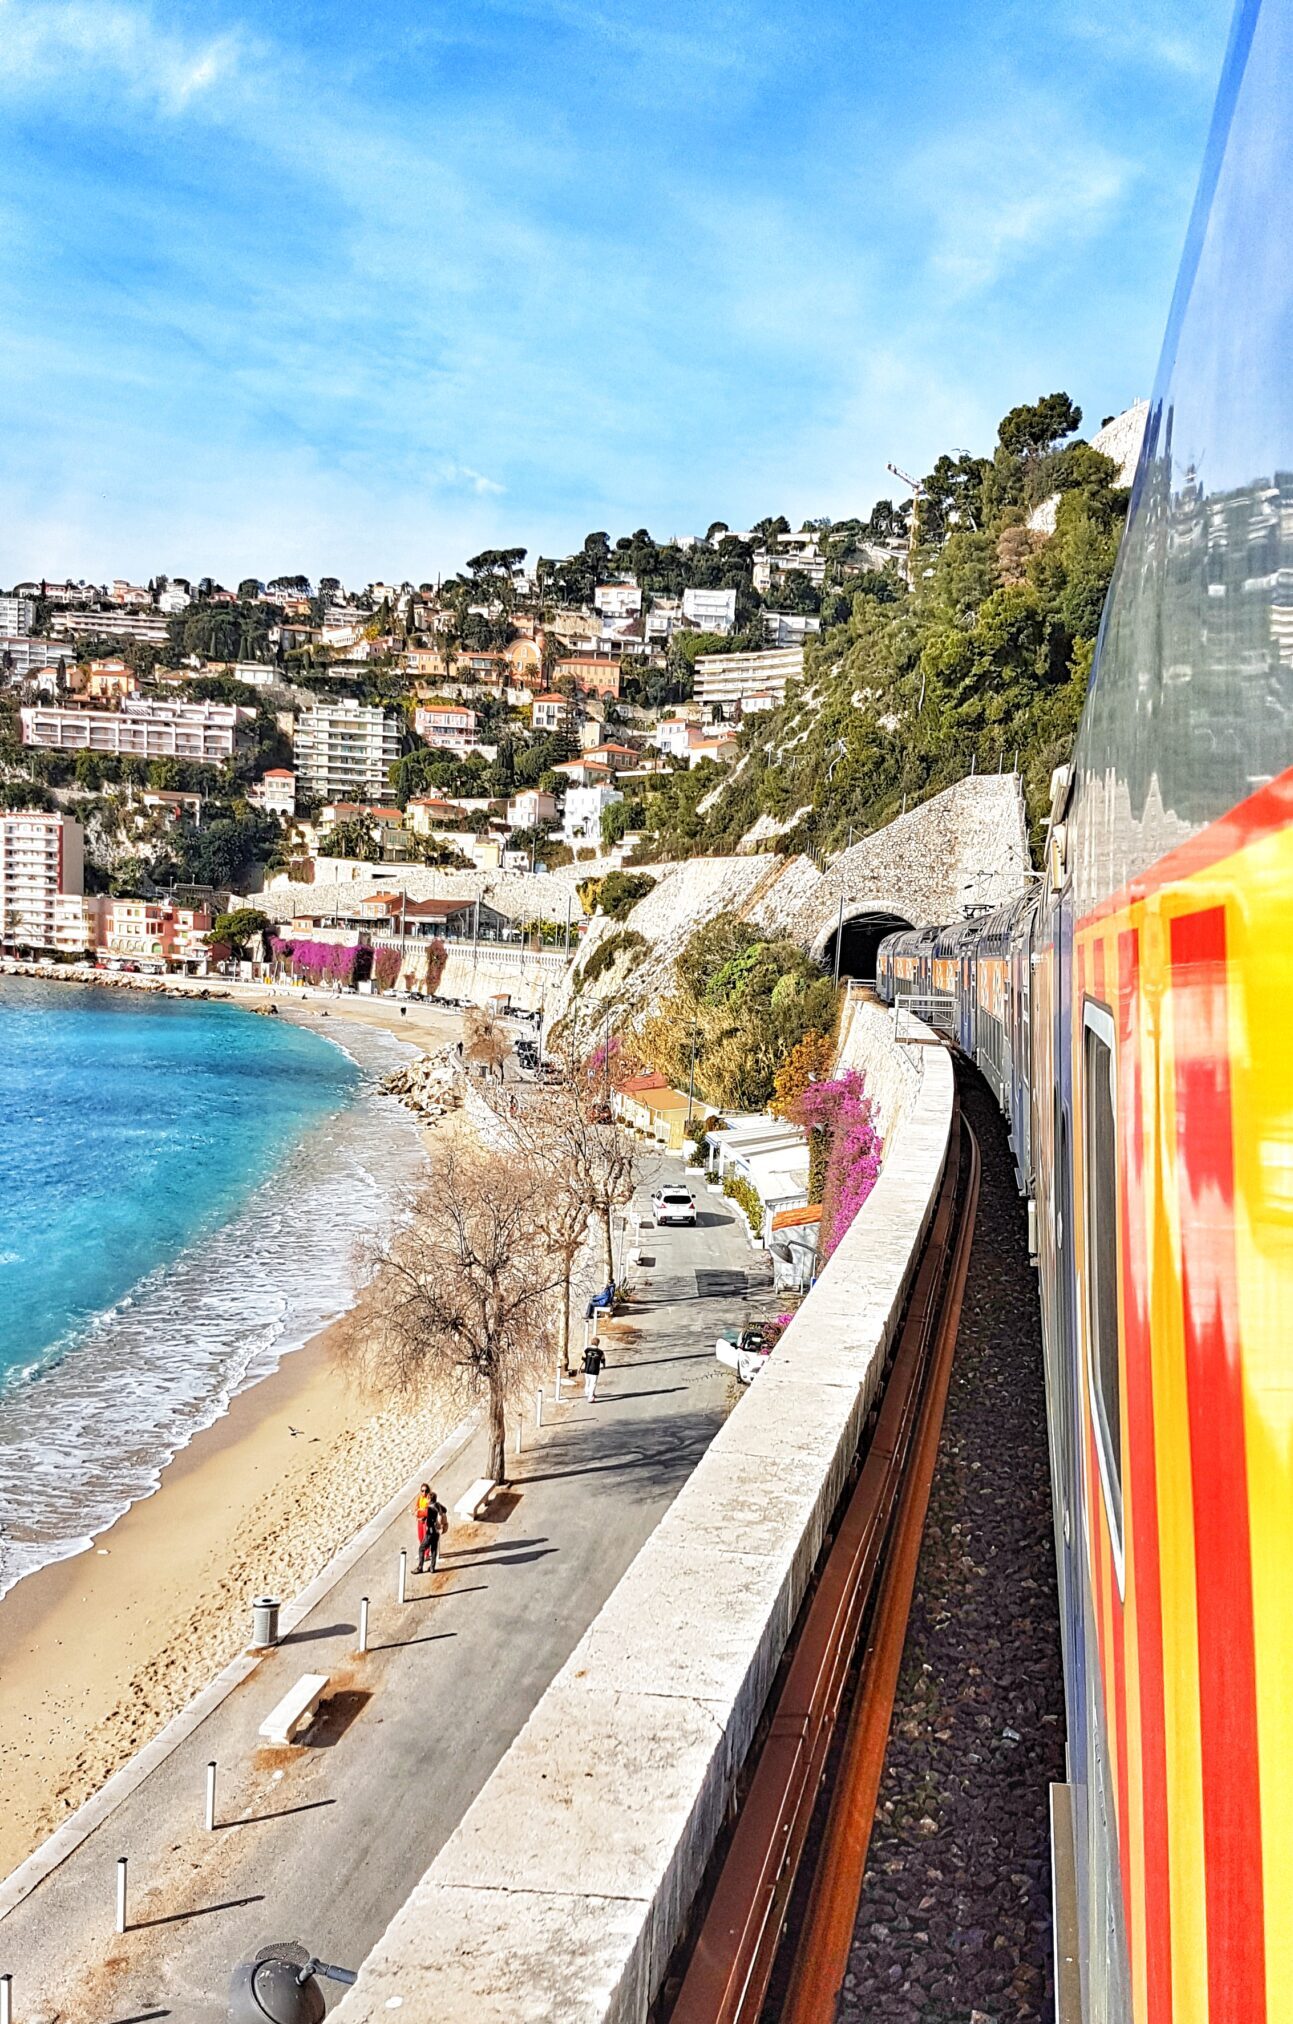 The best European train journeys | The Cannes Ventimiglia railway line. with sea views